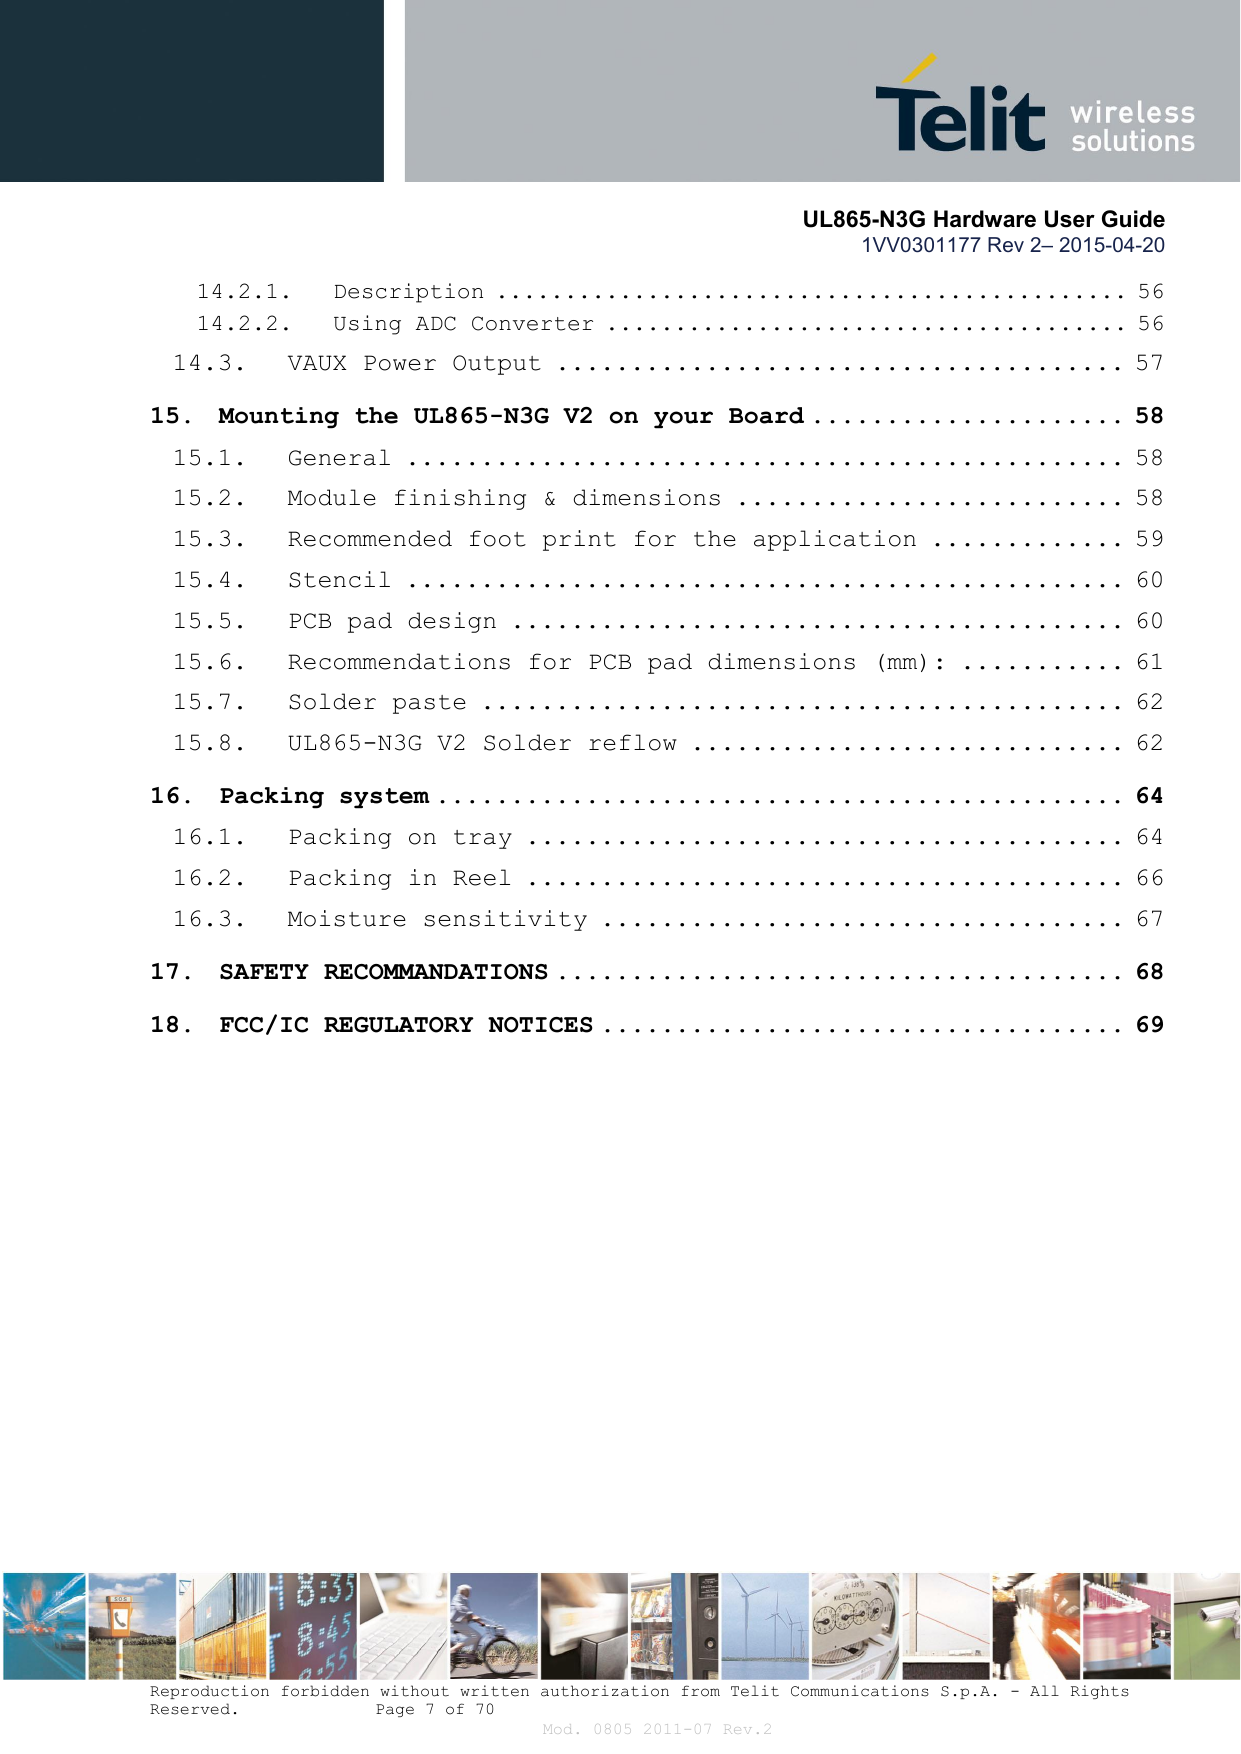       UL865-N3G Hardware User Guide 1VV0301177 Rev 2– 2015-04-20  Reproduction forbidden without written authorization from Telit Communications S.p.A. - All Rights Reserved.    Page 7 of 70 Mod. 0805 2011-07 Rev.2 14.2.1. Description .............................................. 56 14.2.2. Using ADC Converter ...................................... 56 14.3. VAUX Power Output ...................................... 57 15. Mounting the UL865-N3G V2 on your Board ..................... 58 15.1. General ................................................ 58 15.2. Module finishing &amp; dimensions .......................... 58 15.3. Recommended foot print for the application ............. 59 15.4. Stencil ................................................ 60 15.5. PCB pad design ......................................... 60 15.6. Recommendations for PCB pad dimensions (mm): ........... 61 15.7. Solder paste ........................................... 62 15.8. UL865-N3G V2 Solder reflow ............................. 62 16. Packing system .............................................. 64 16.1. Packing on tray ........................................ 64 16.2. Packing in Reel ........................................ 66 16.3. Moisture sensitivity ................................... 67 17. SAFETY RECOMMANDATIONS ...................................... 68 18. FCC/IC REGULATORY NOTICES ................................... 69  